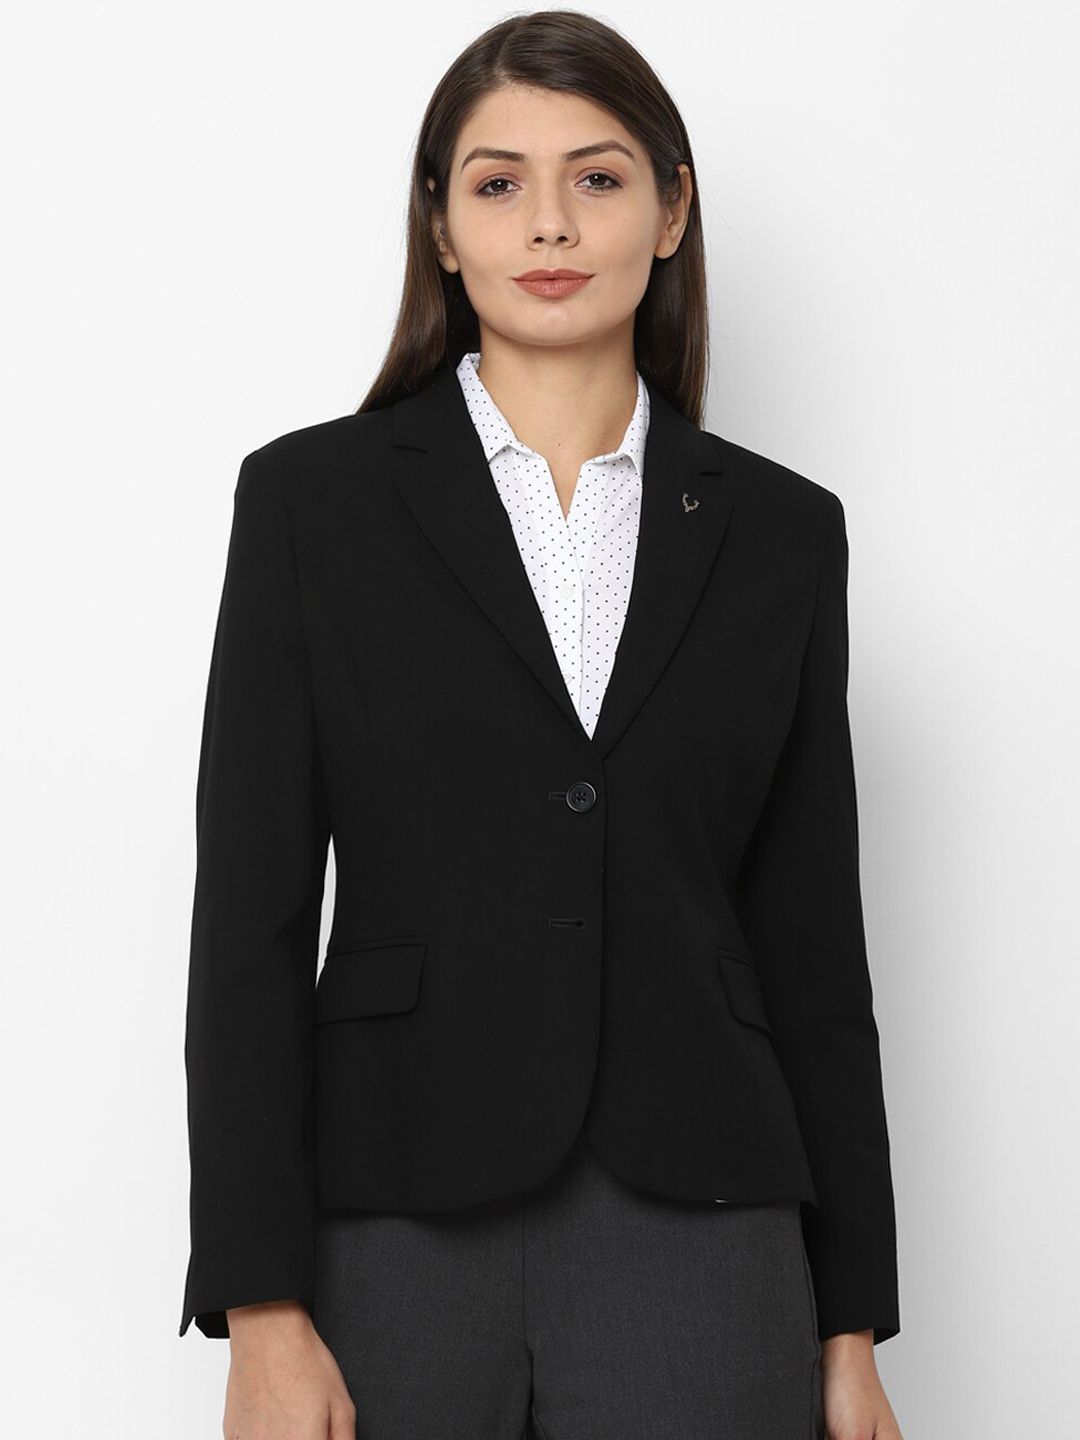 Allen Solly Woman Women Black Solid Single-Breasted Formal Blazer Price in India